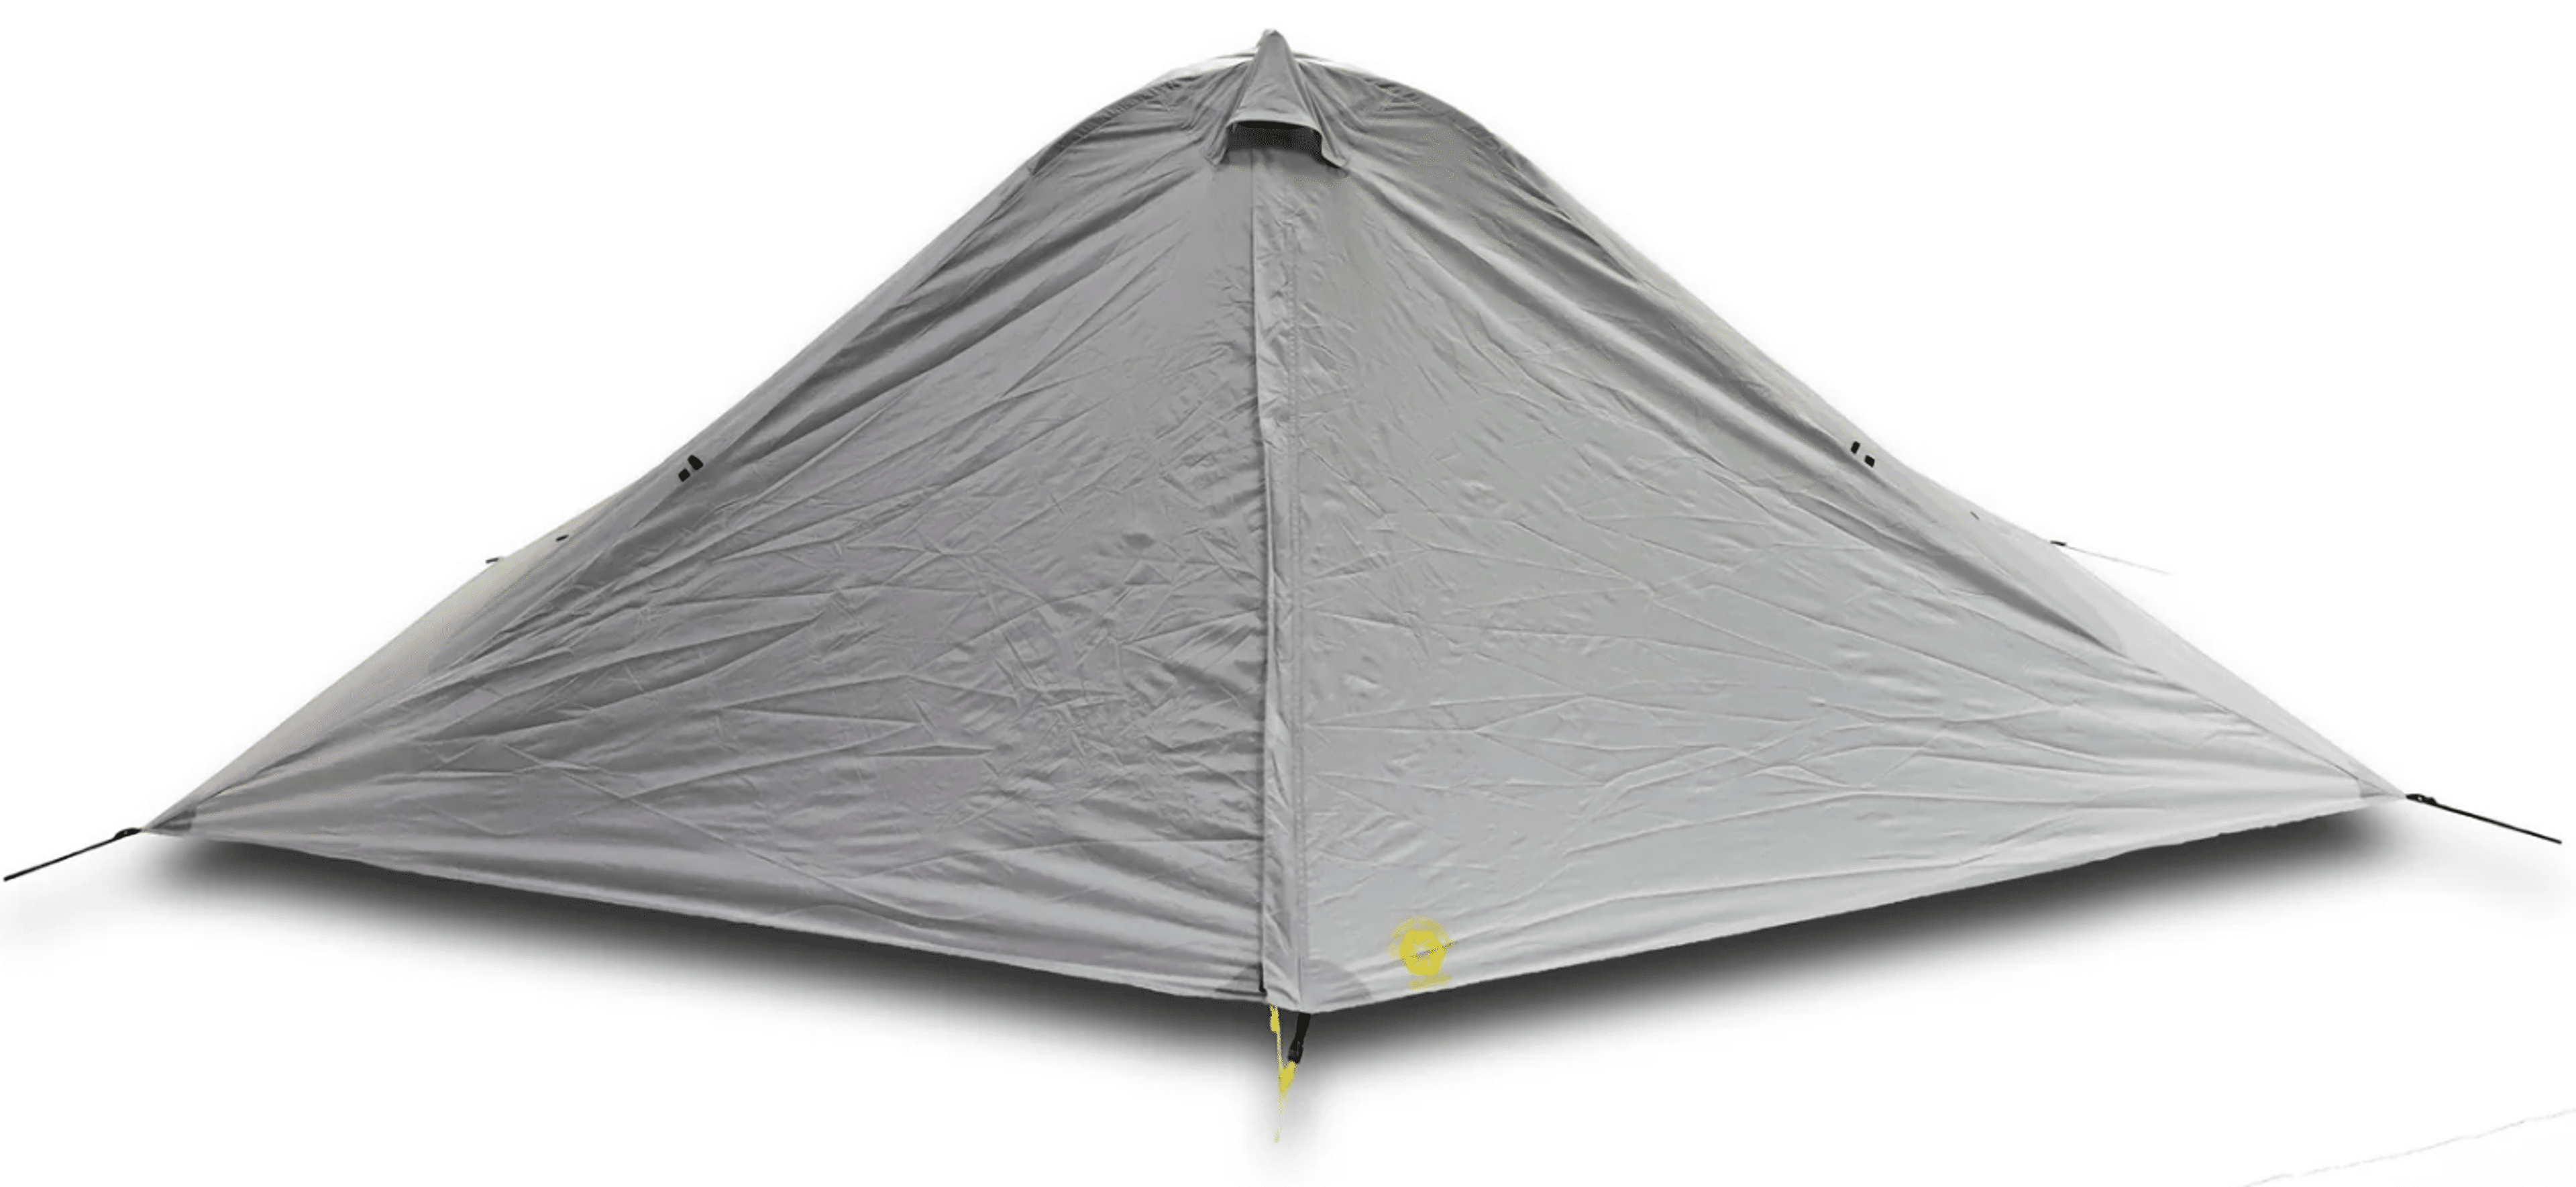 Six Moon Designs Lunar Duo Outfitter Hiking Tent